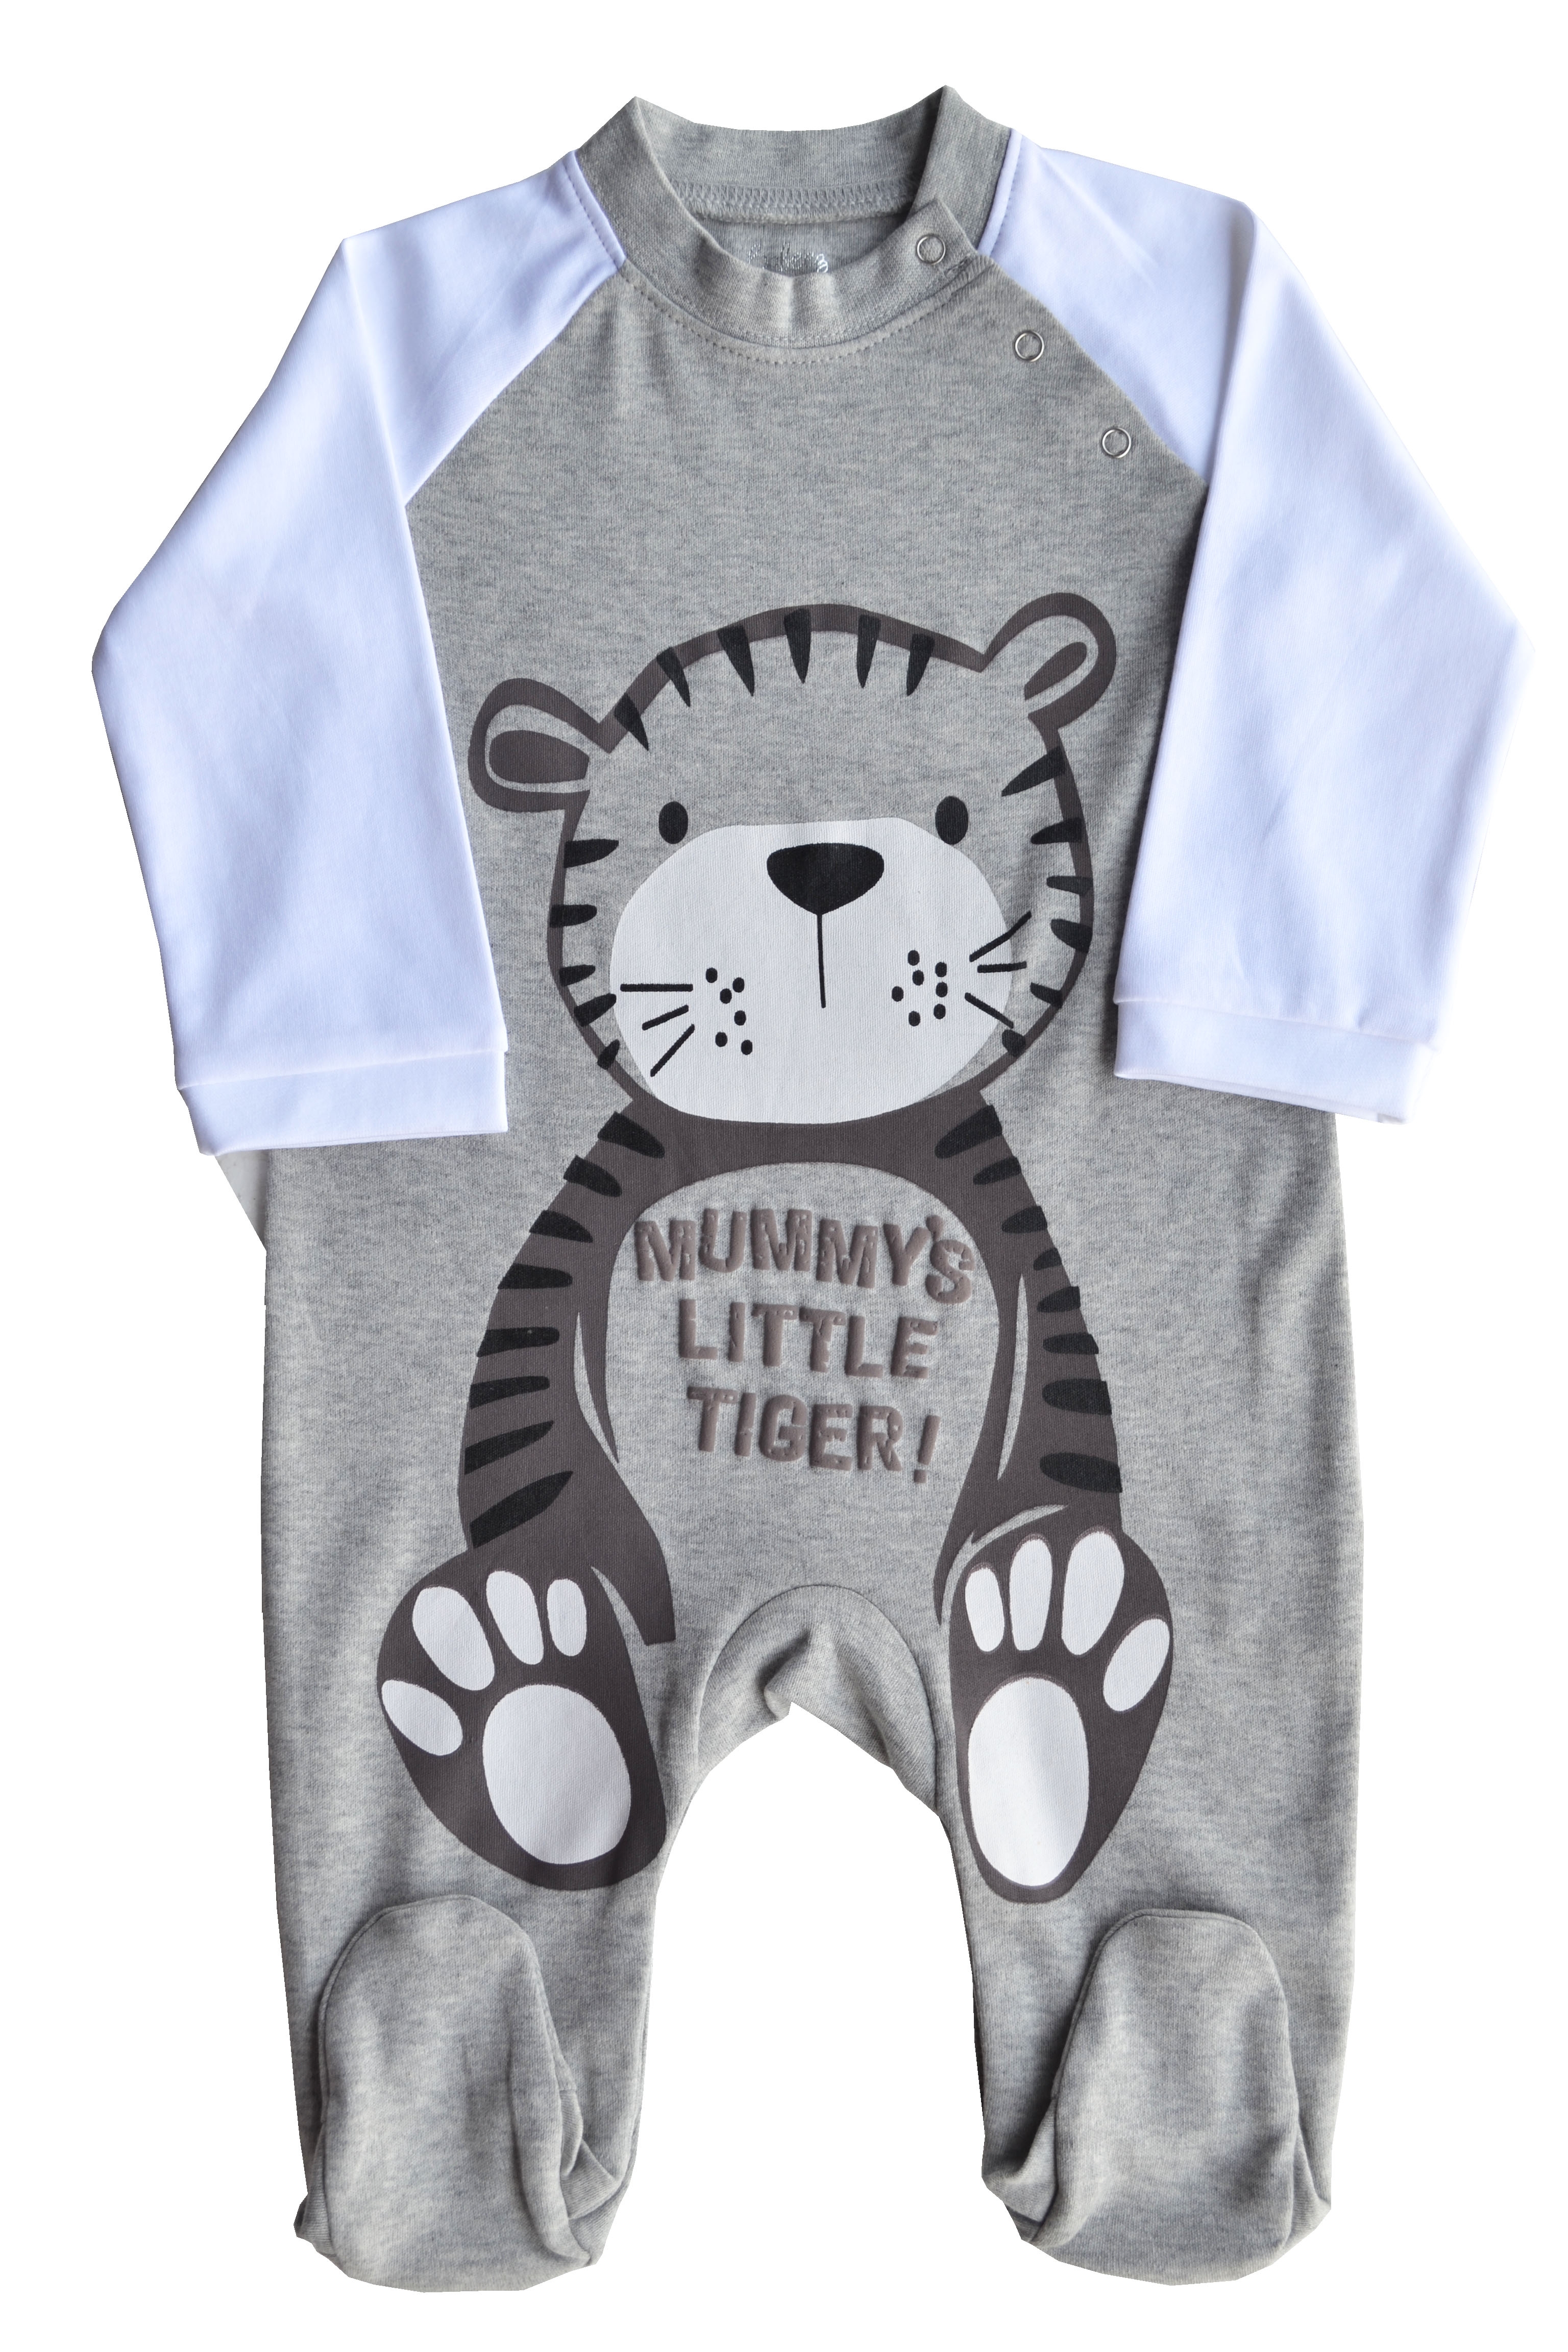 Grey Romper/Sleeper with White Full sleeves Feet with Tiger Print